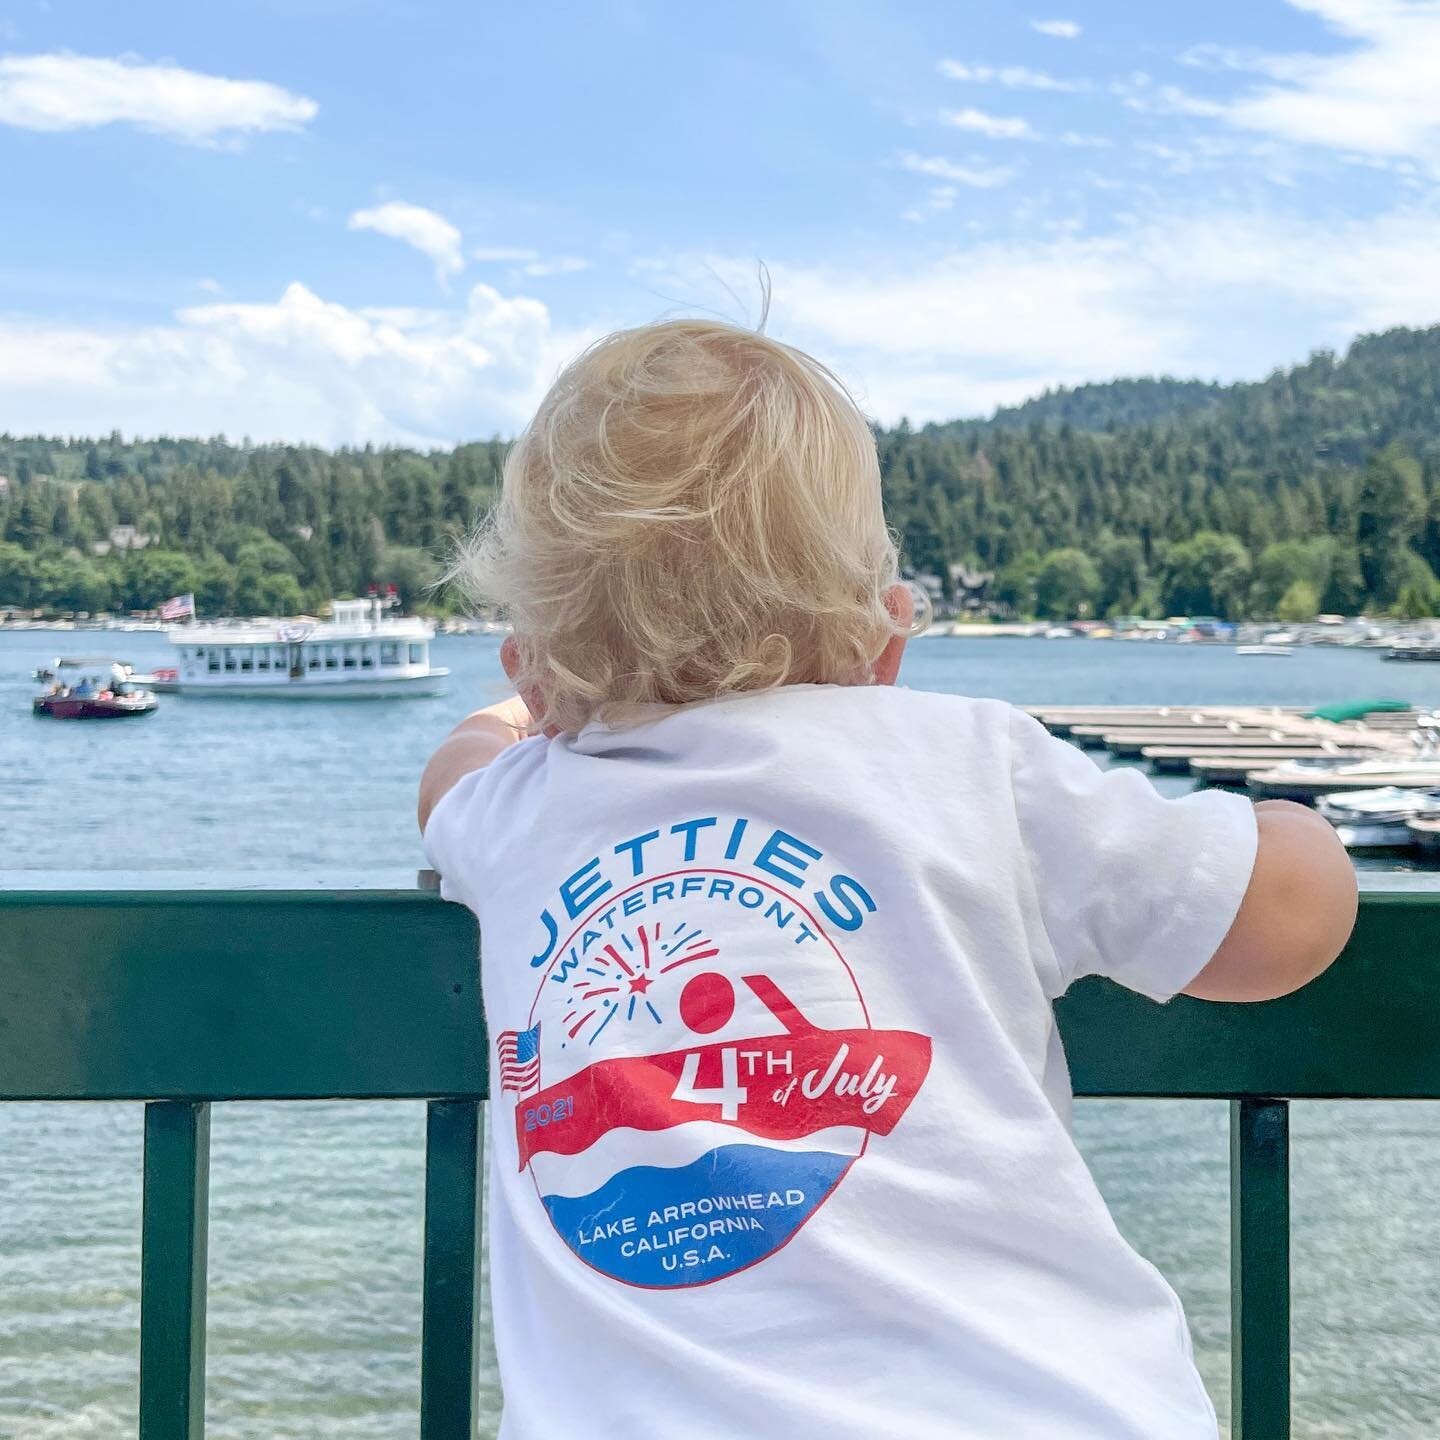 There&rsquo;s no better spot for the little ones to watch the boat action on the lake. 

Come beat the heat at Jetties Waterfront this weekend.